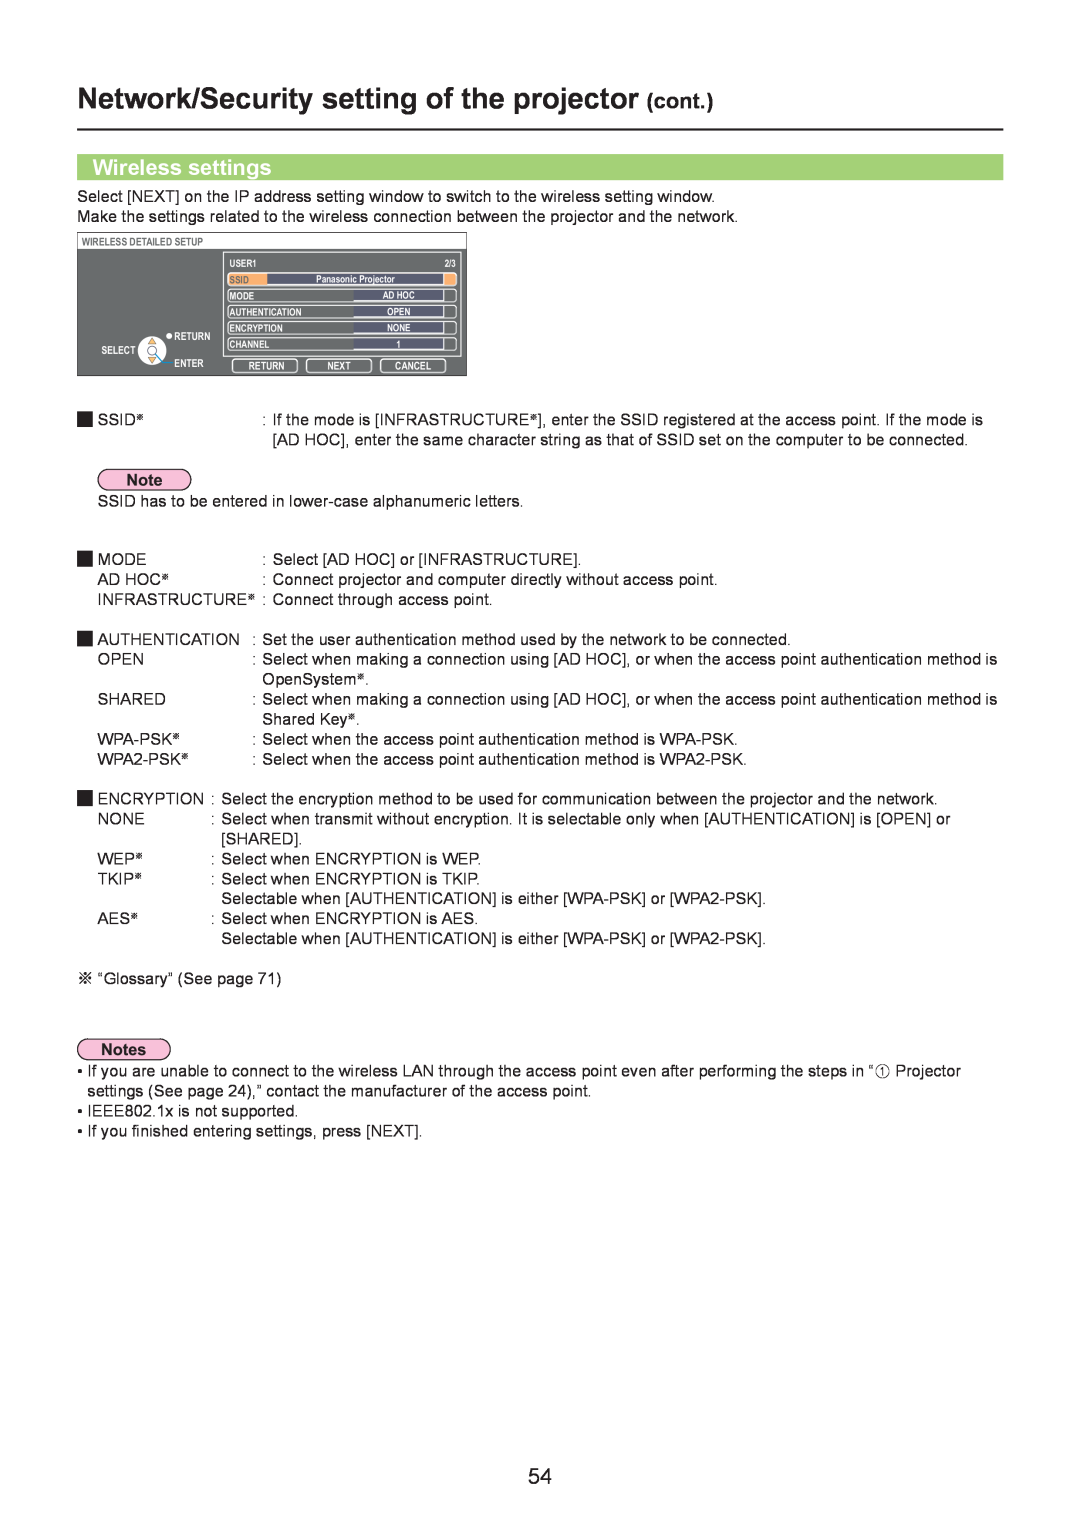 Panasonic TQBH0205-4 operation manual Wireless settings, Network/Security setting of the projector cont, Open 